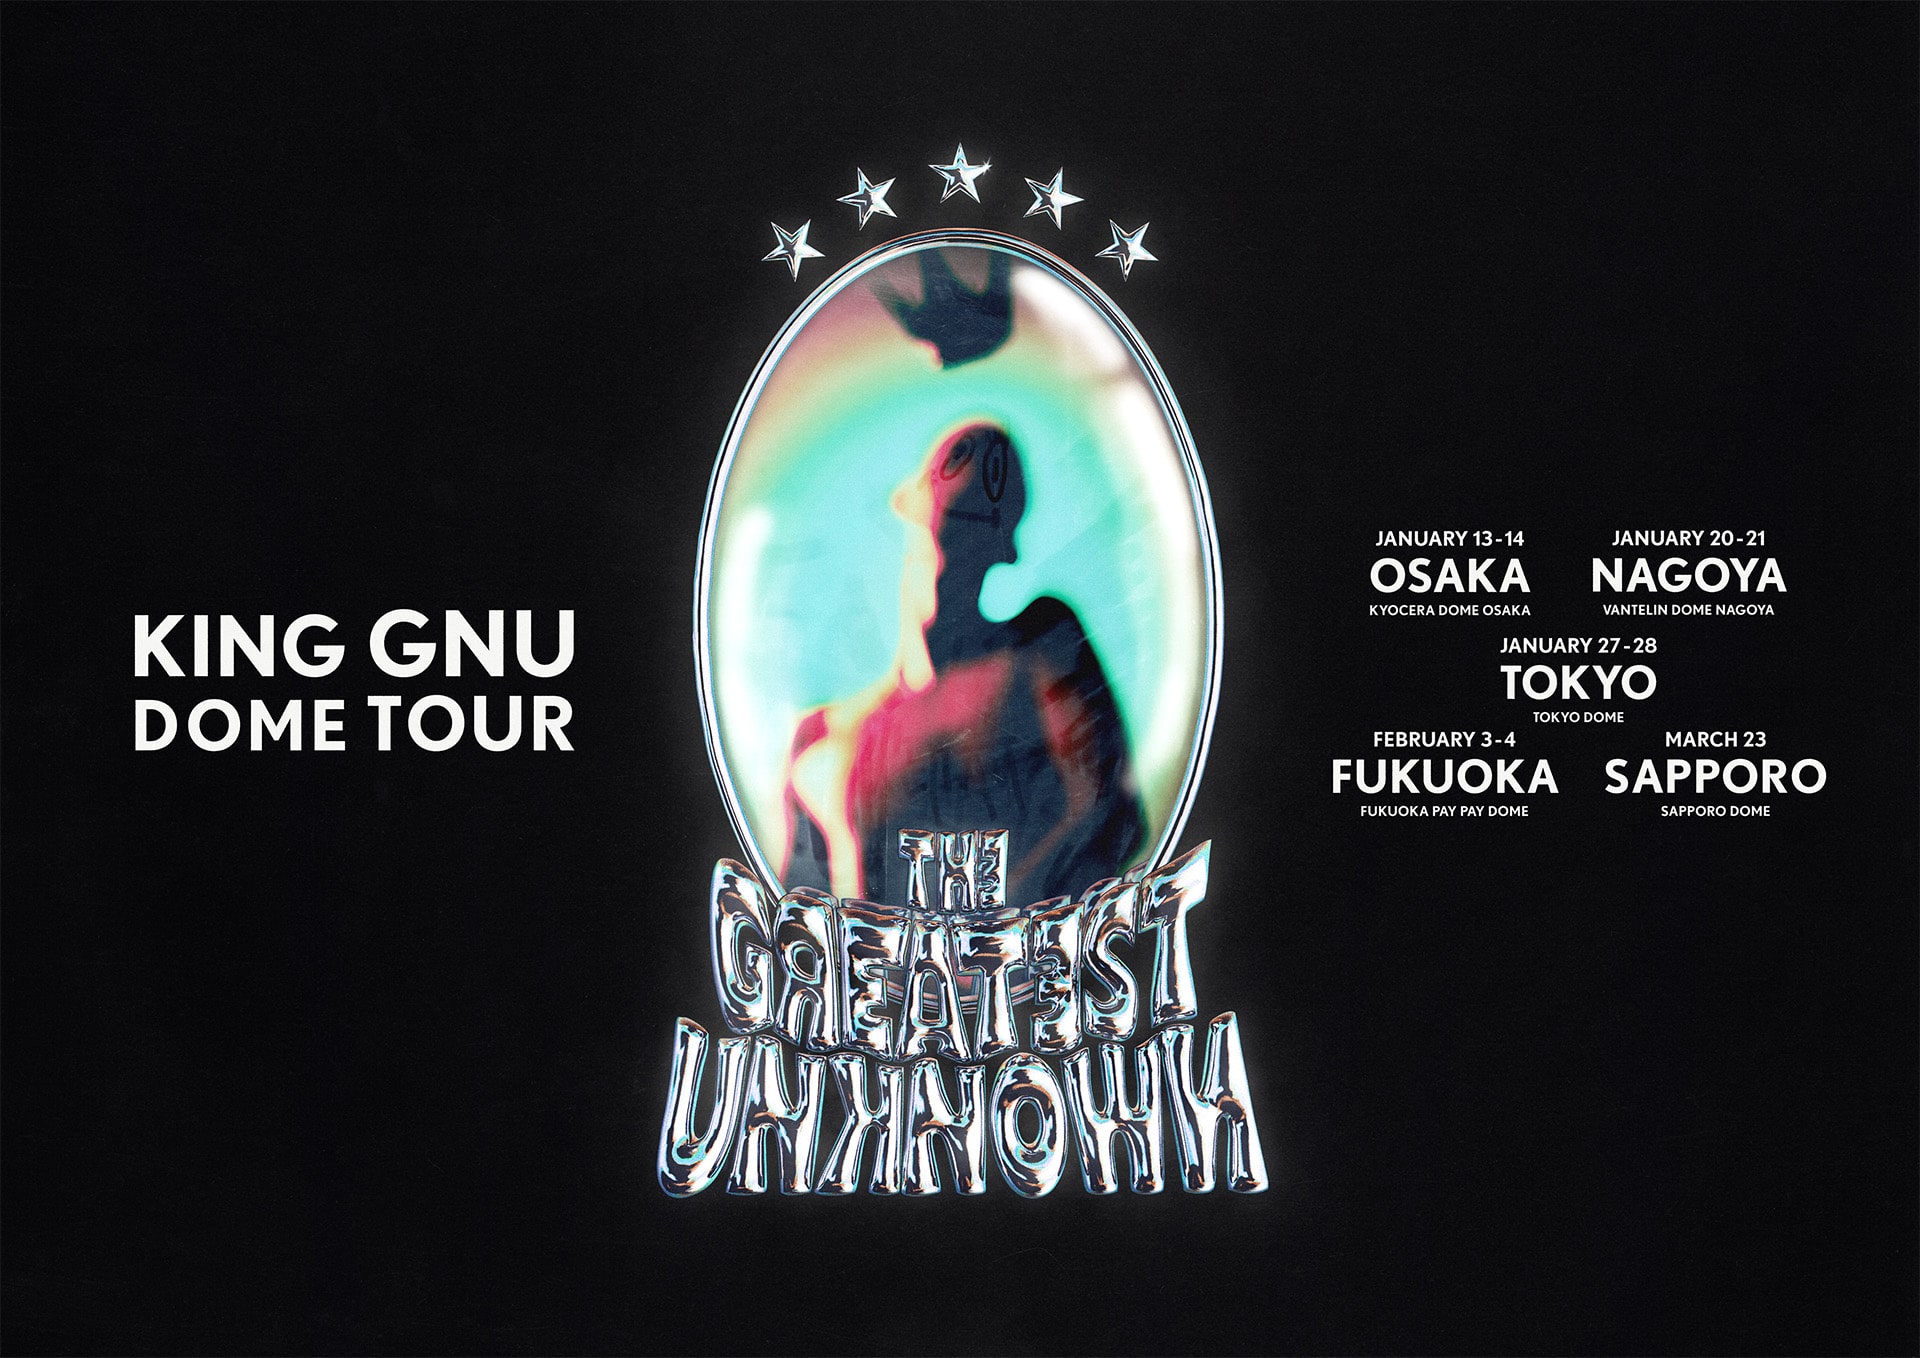 King Gnu Dome Tour『THE GREATEST UNKNOWN』